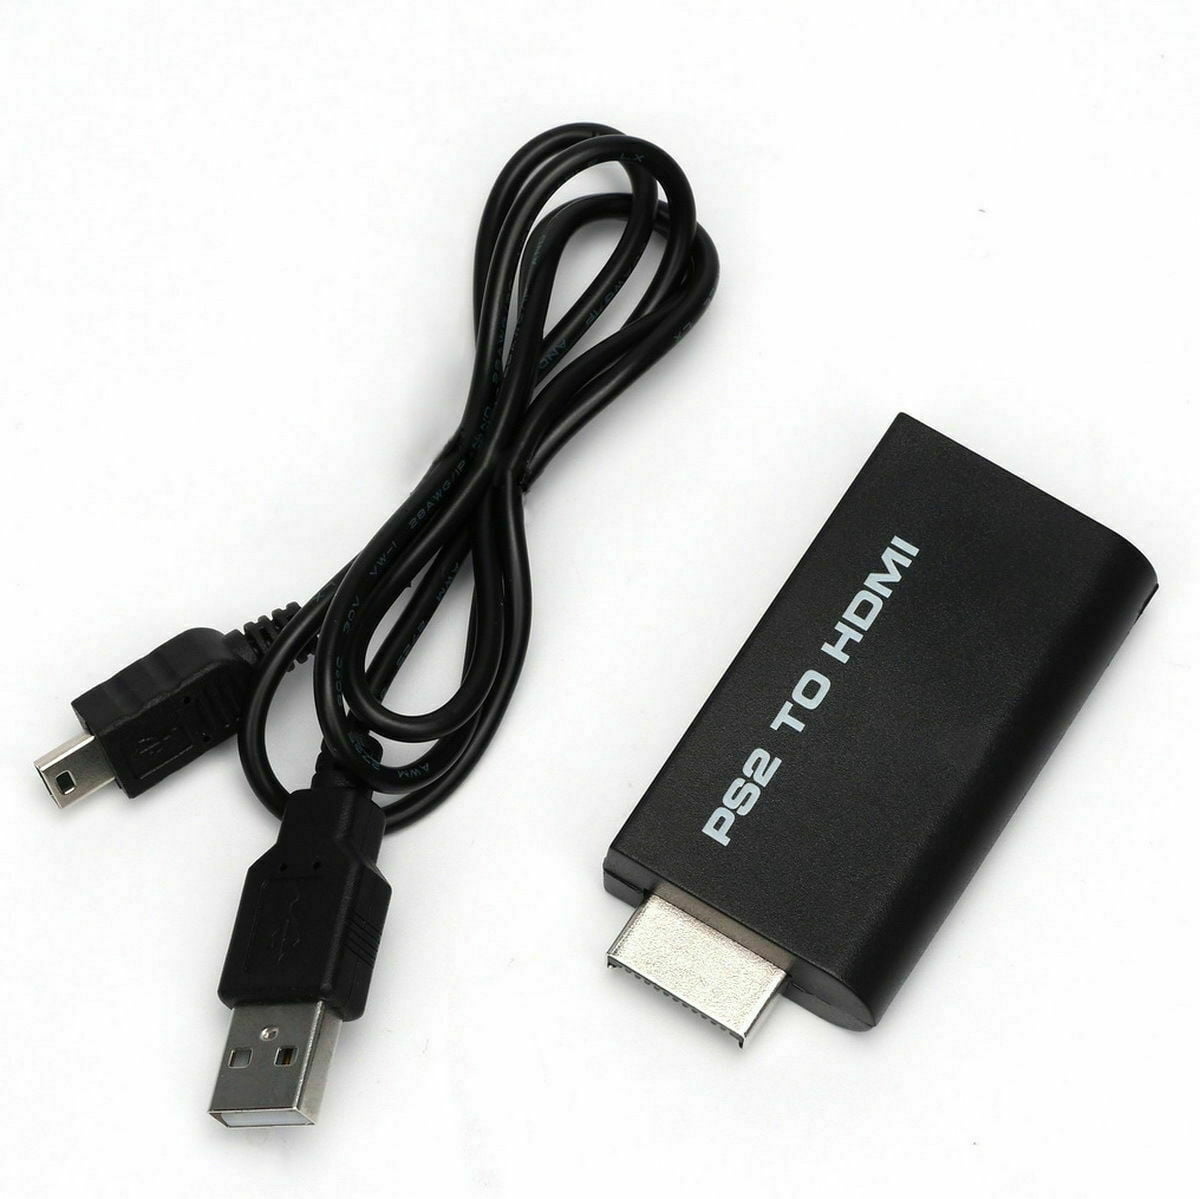 ps2 hdmi cable